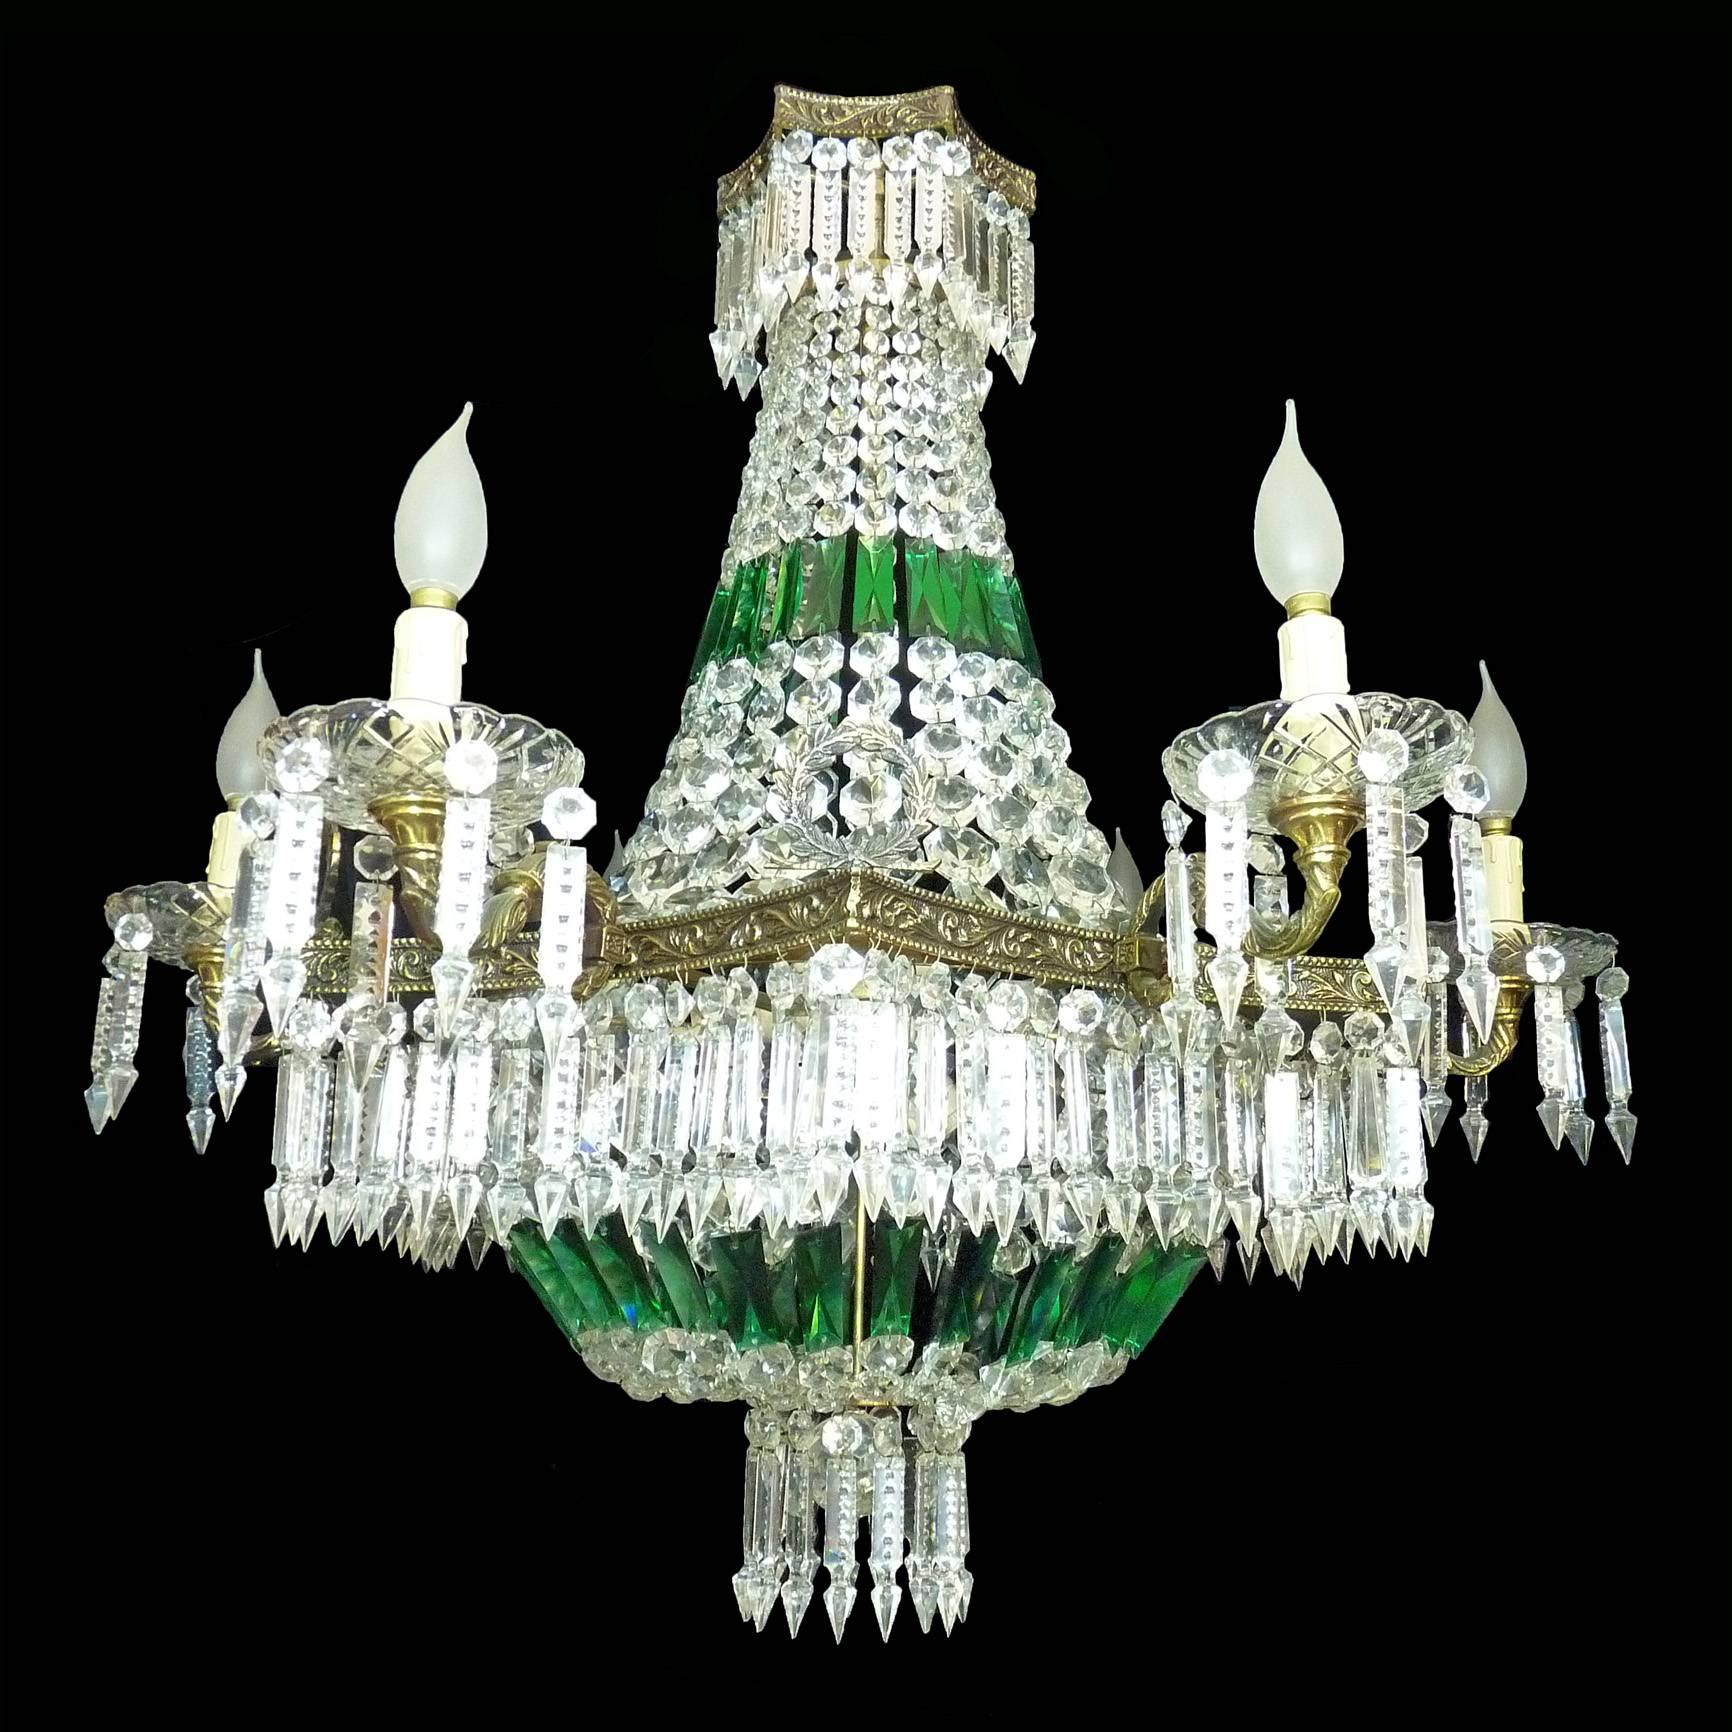 Stunning monumental French Regency Empire emerald green cut crystal beads and swags, basket shaped and bronze chandelier with 15 light
Measures:
Diameter 32 in / 81 cm
Height 52 in (36 in+ 16 in/chain) / 130 cm (90 cm + 40 cm/chain)
Weight 46 lb/ 21